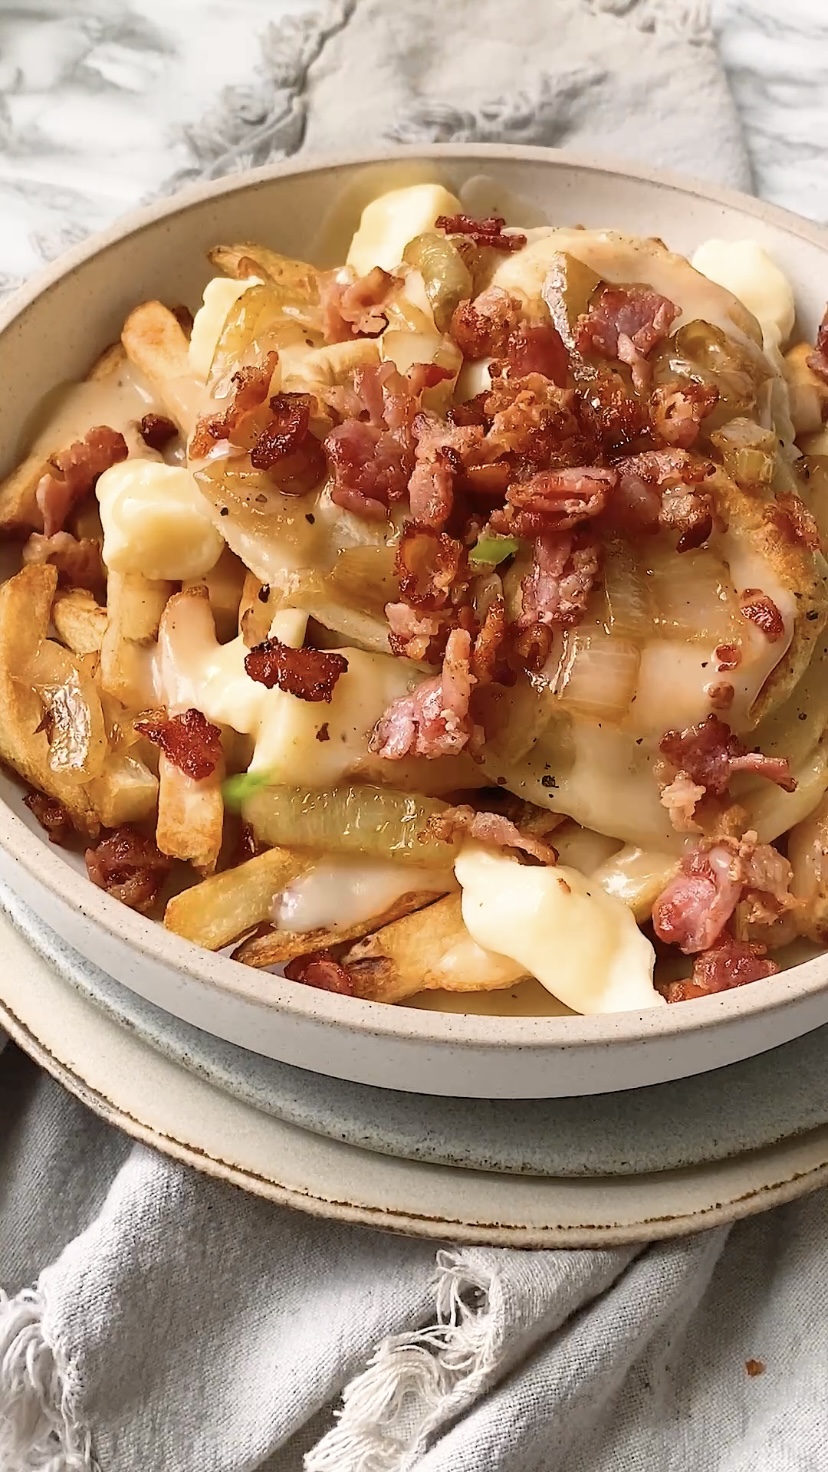 Fries with pierogis, gravy, cheese curds and bacon.